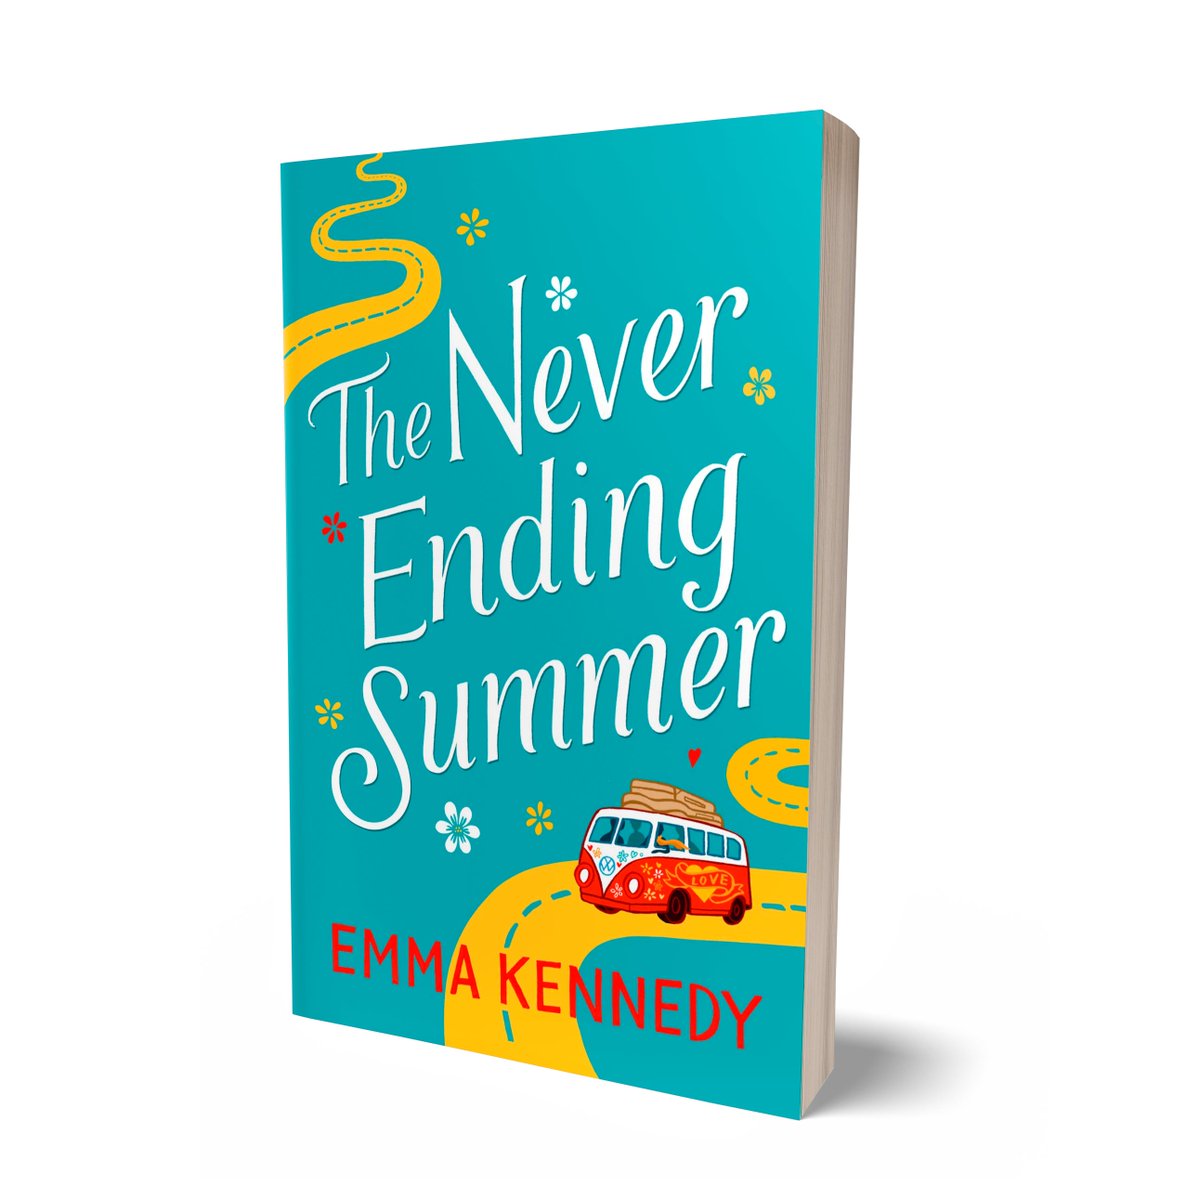 I love our @EKBookshelf community, and to share that love I am offering all of you the chance to win a finished copy of my new book #TheNeverEndingSummer All you have to do is follow the bookshelf community here, and RT this tweet. Competition ends at midnight on Friday 23rd!